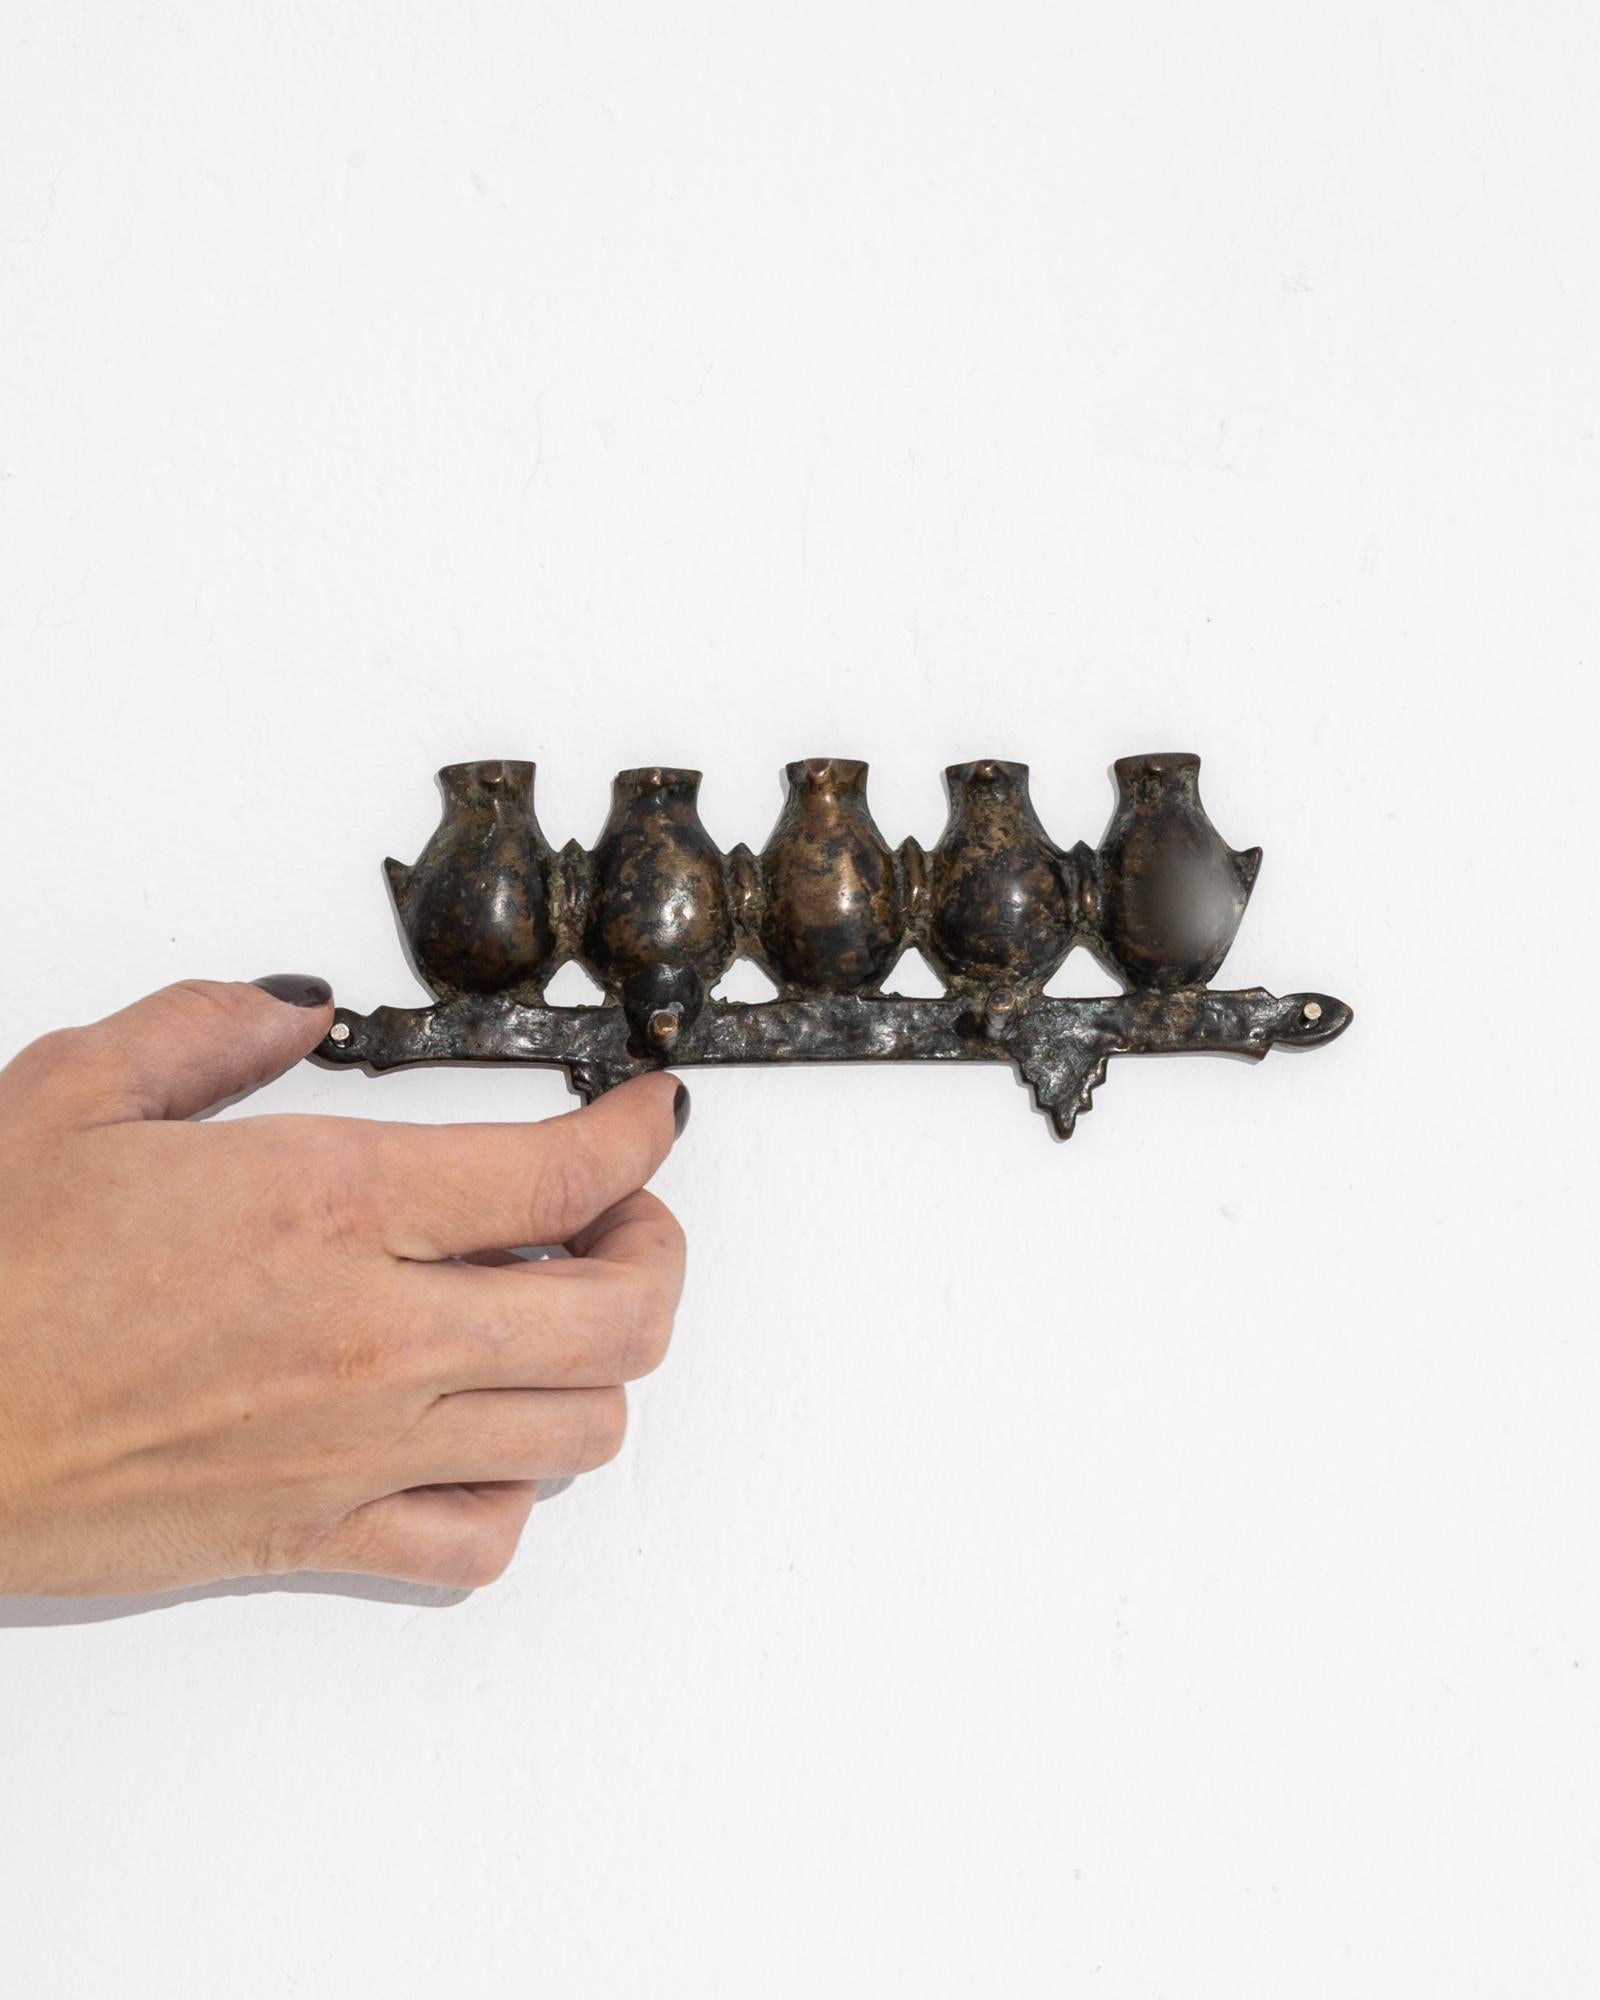 A 19th century bronze wall decoration produced in Asia, this unique piece presents a row of five plump birds standing on a stylized branch, completed by two little hooks. Flaunting a lush oxidized patina, the bronze displays a rich palette of jet